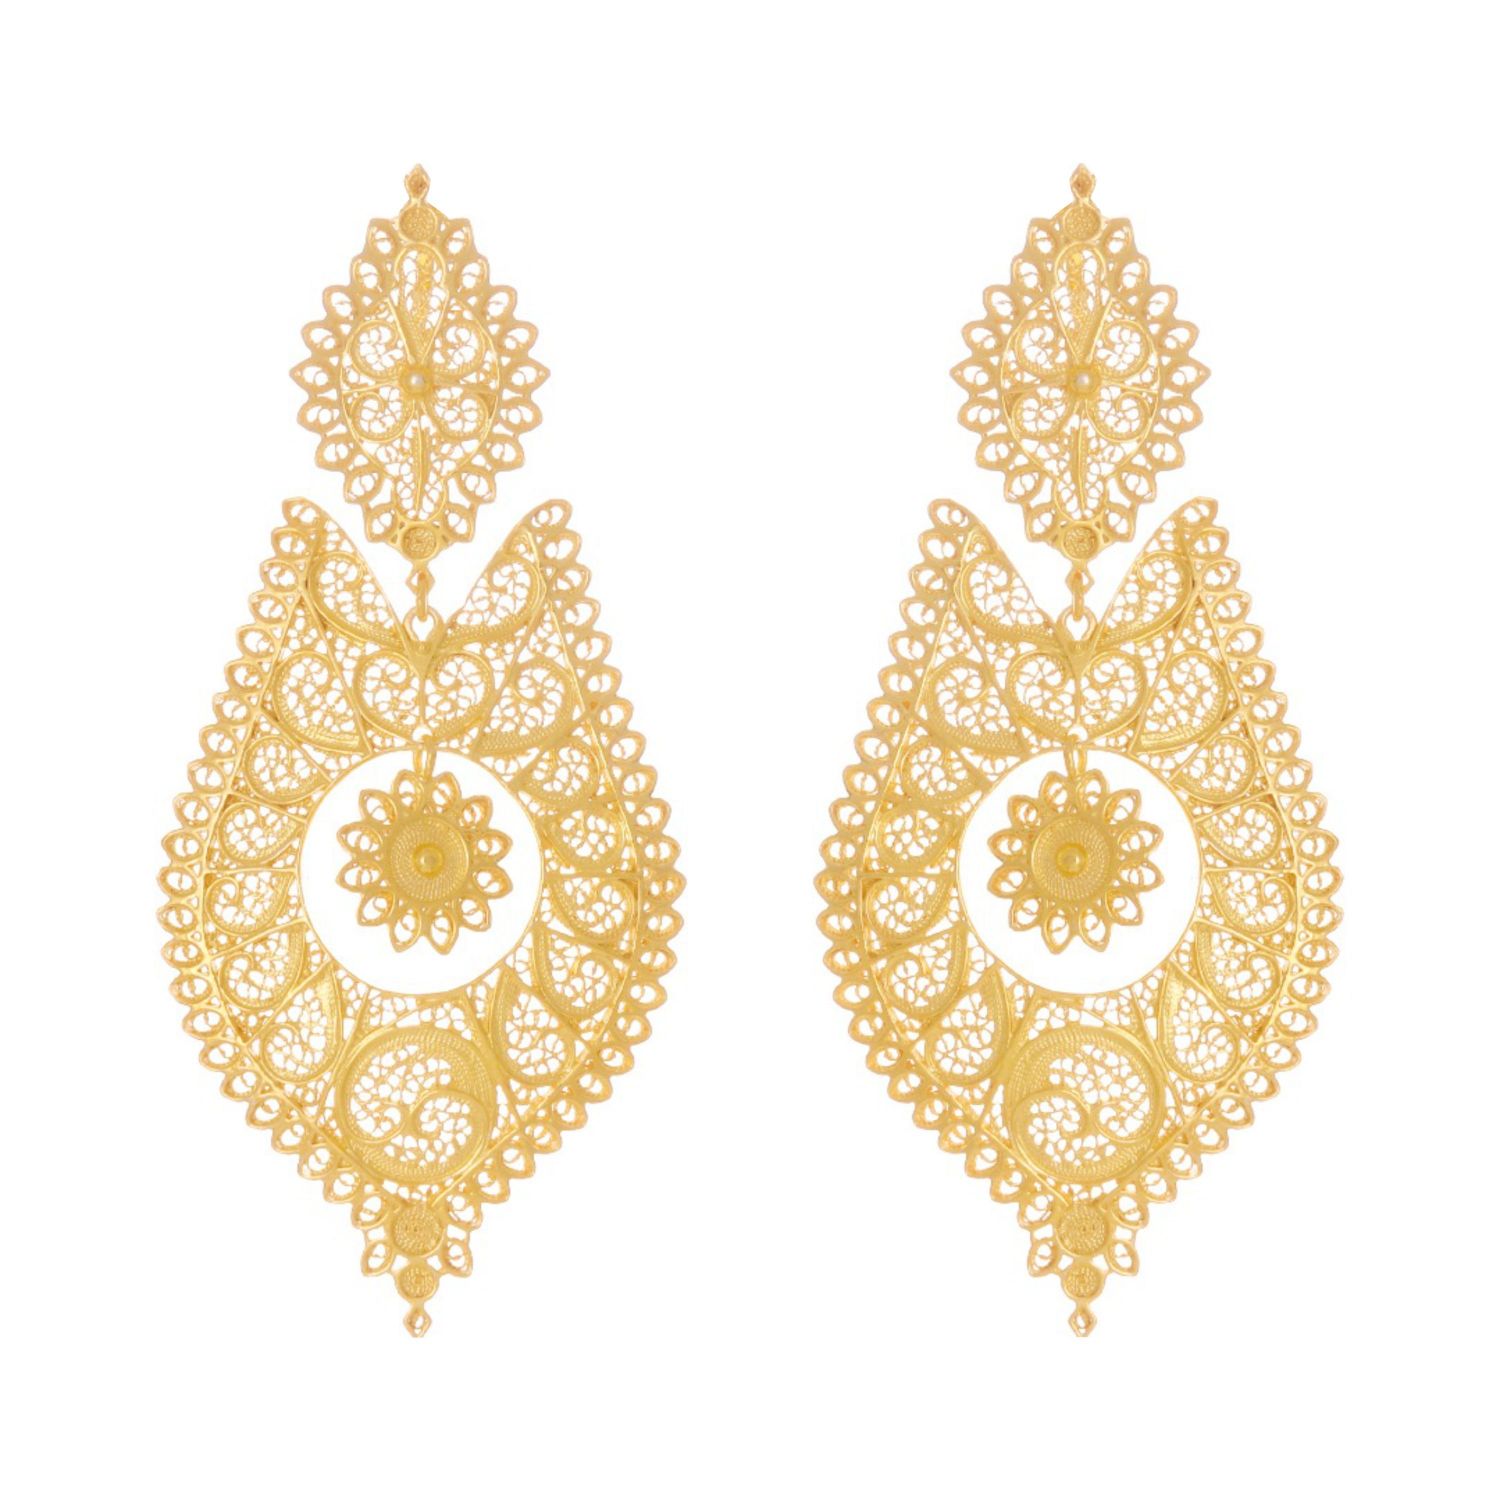 Queen Earrings Icone in Gold Plated Silver 